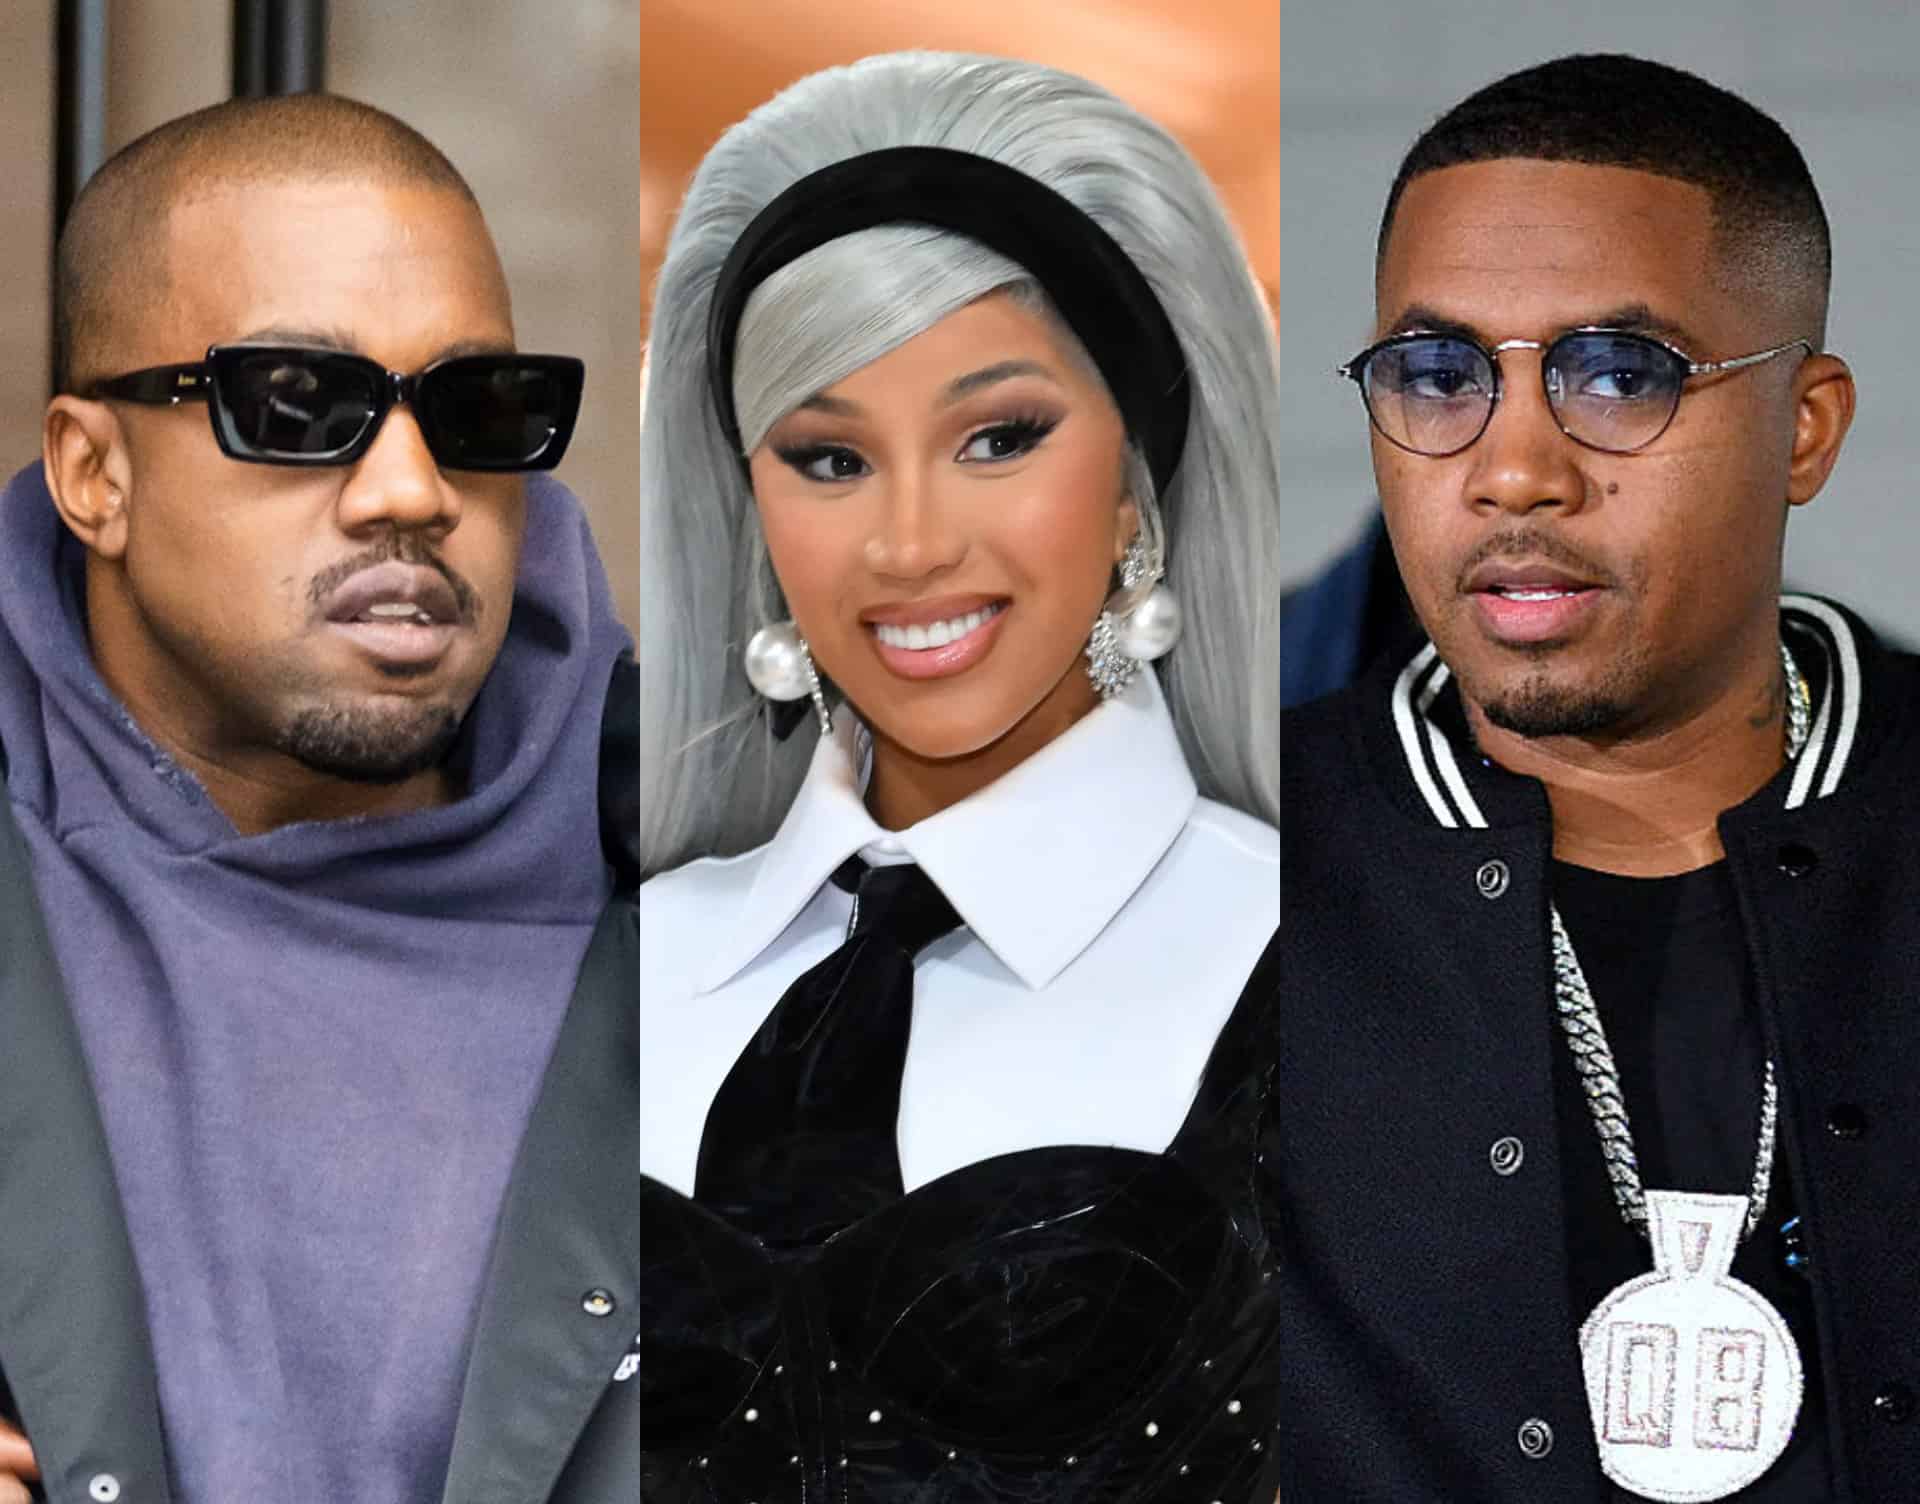 Kanye West Slams Cardi B, Nas, Pusha T & More In Surfaced 2018 Footage